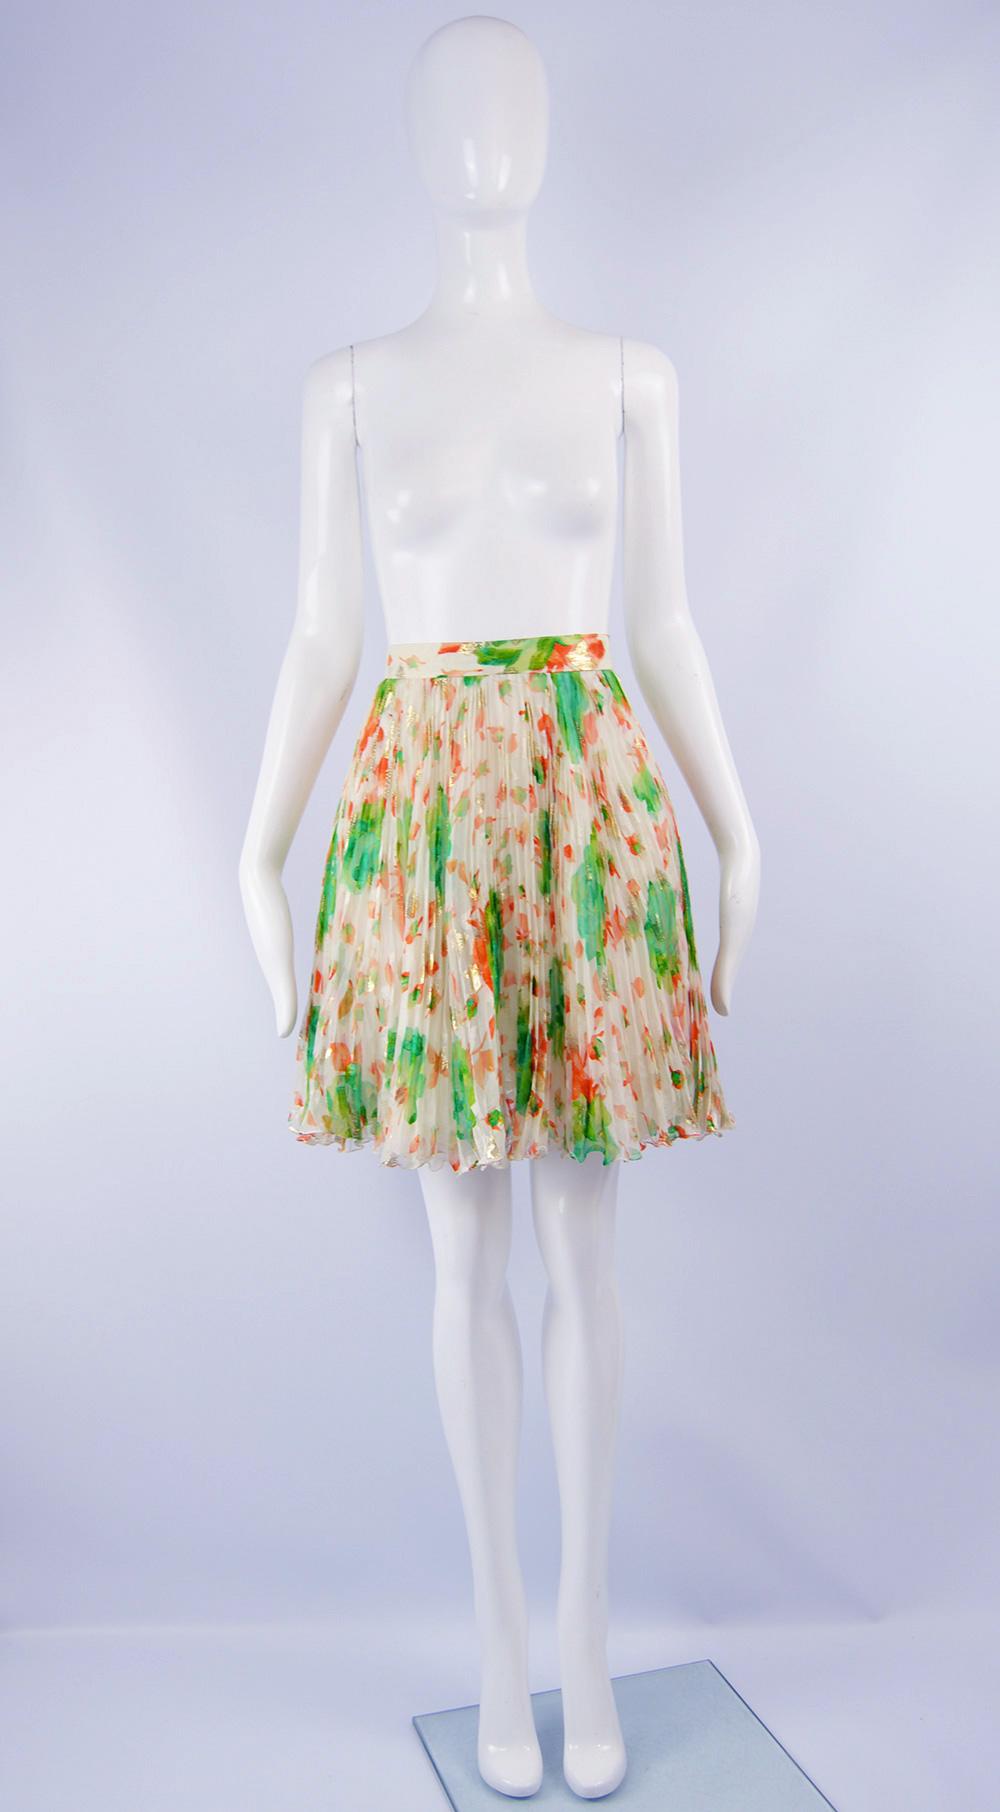 A fabulous vintage mini skirt from the 80s by luxury French fashion designer, Emanuel Ungaro. In a floaty, off white silk chiffon (please note color of the skirt is slightly whiter than in the pictures) with a bold orange and green print and satin